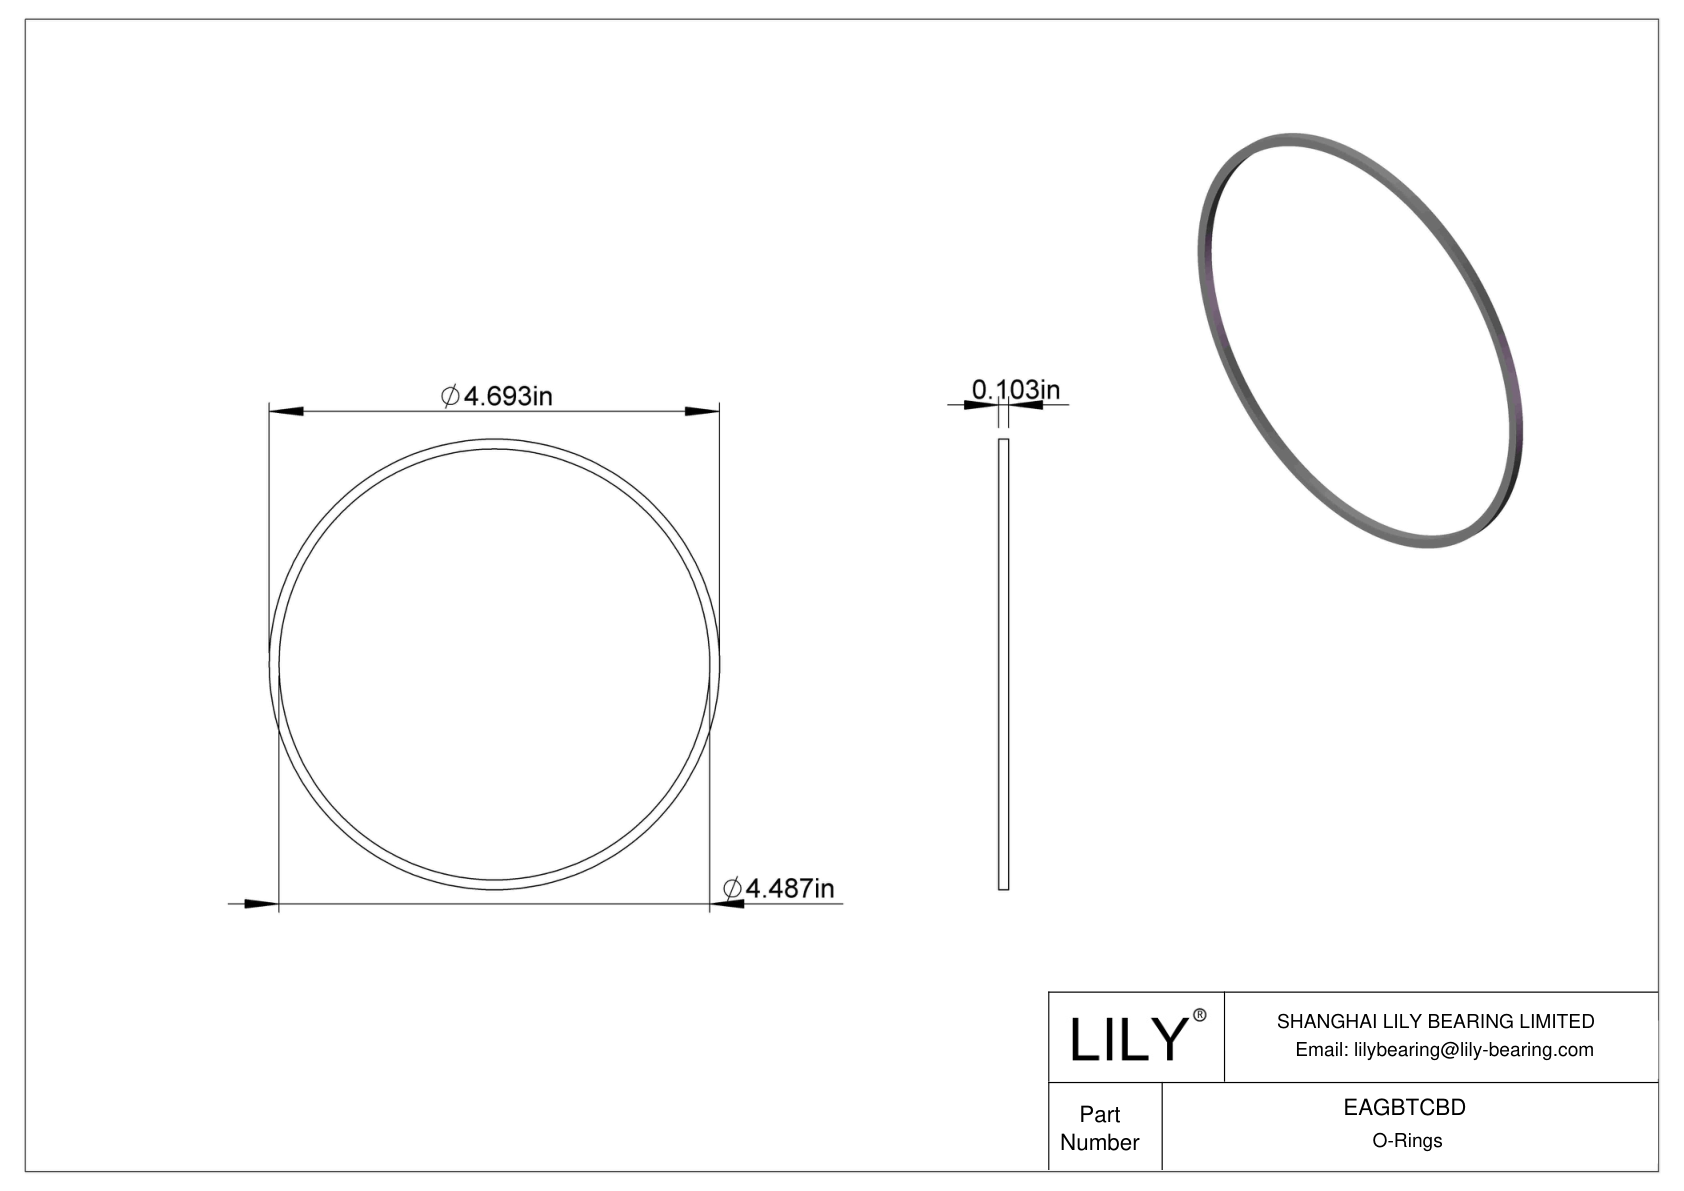 EAGBTCBD Oil Resistant O-Rings Square cad drawing